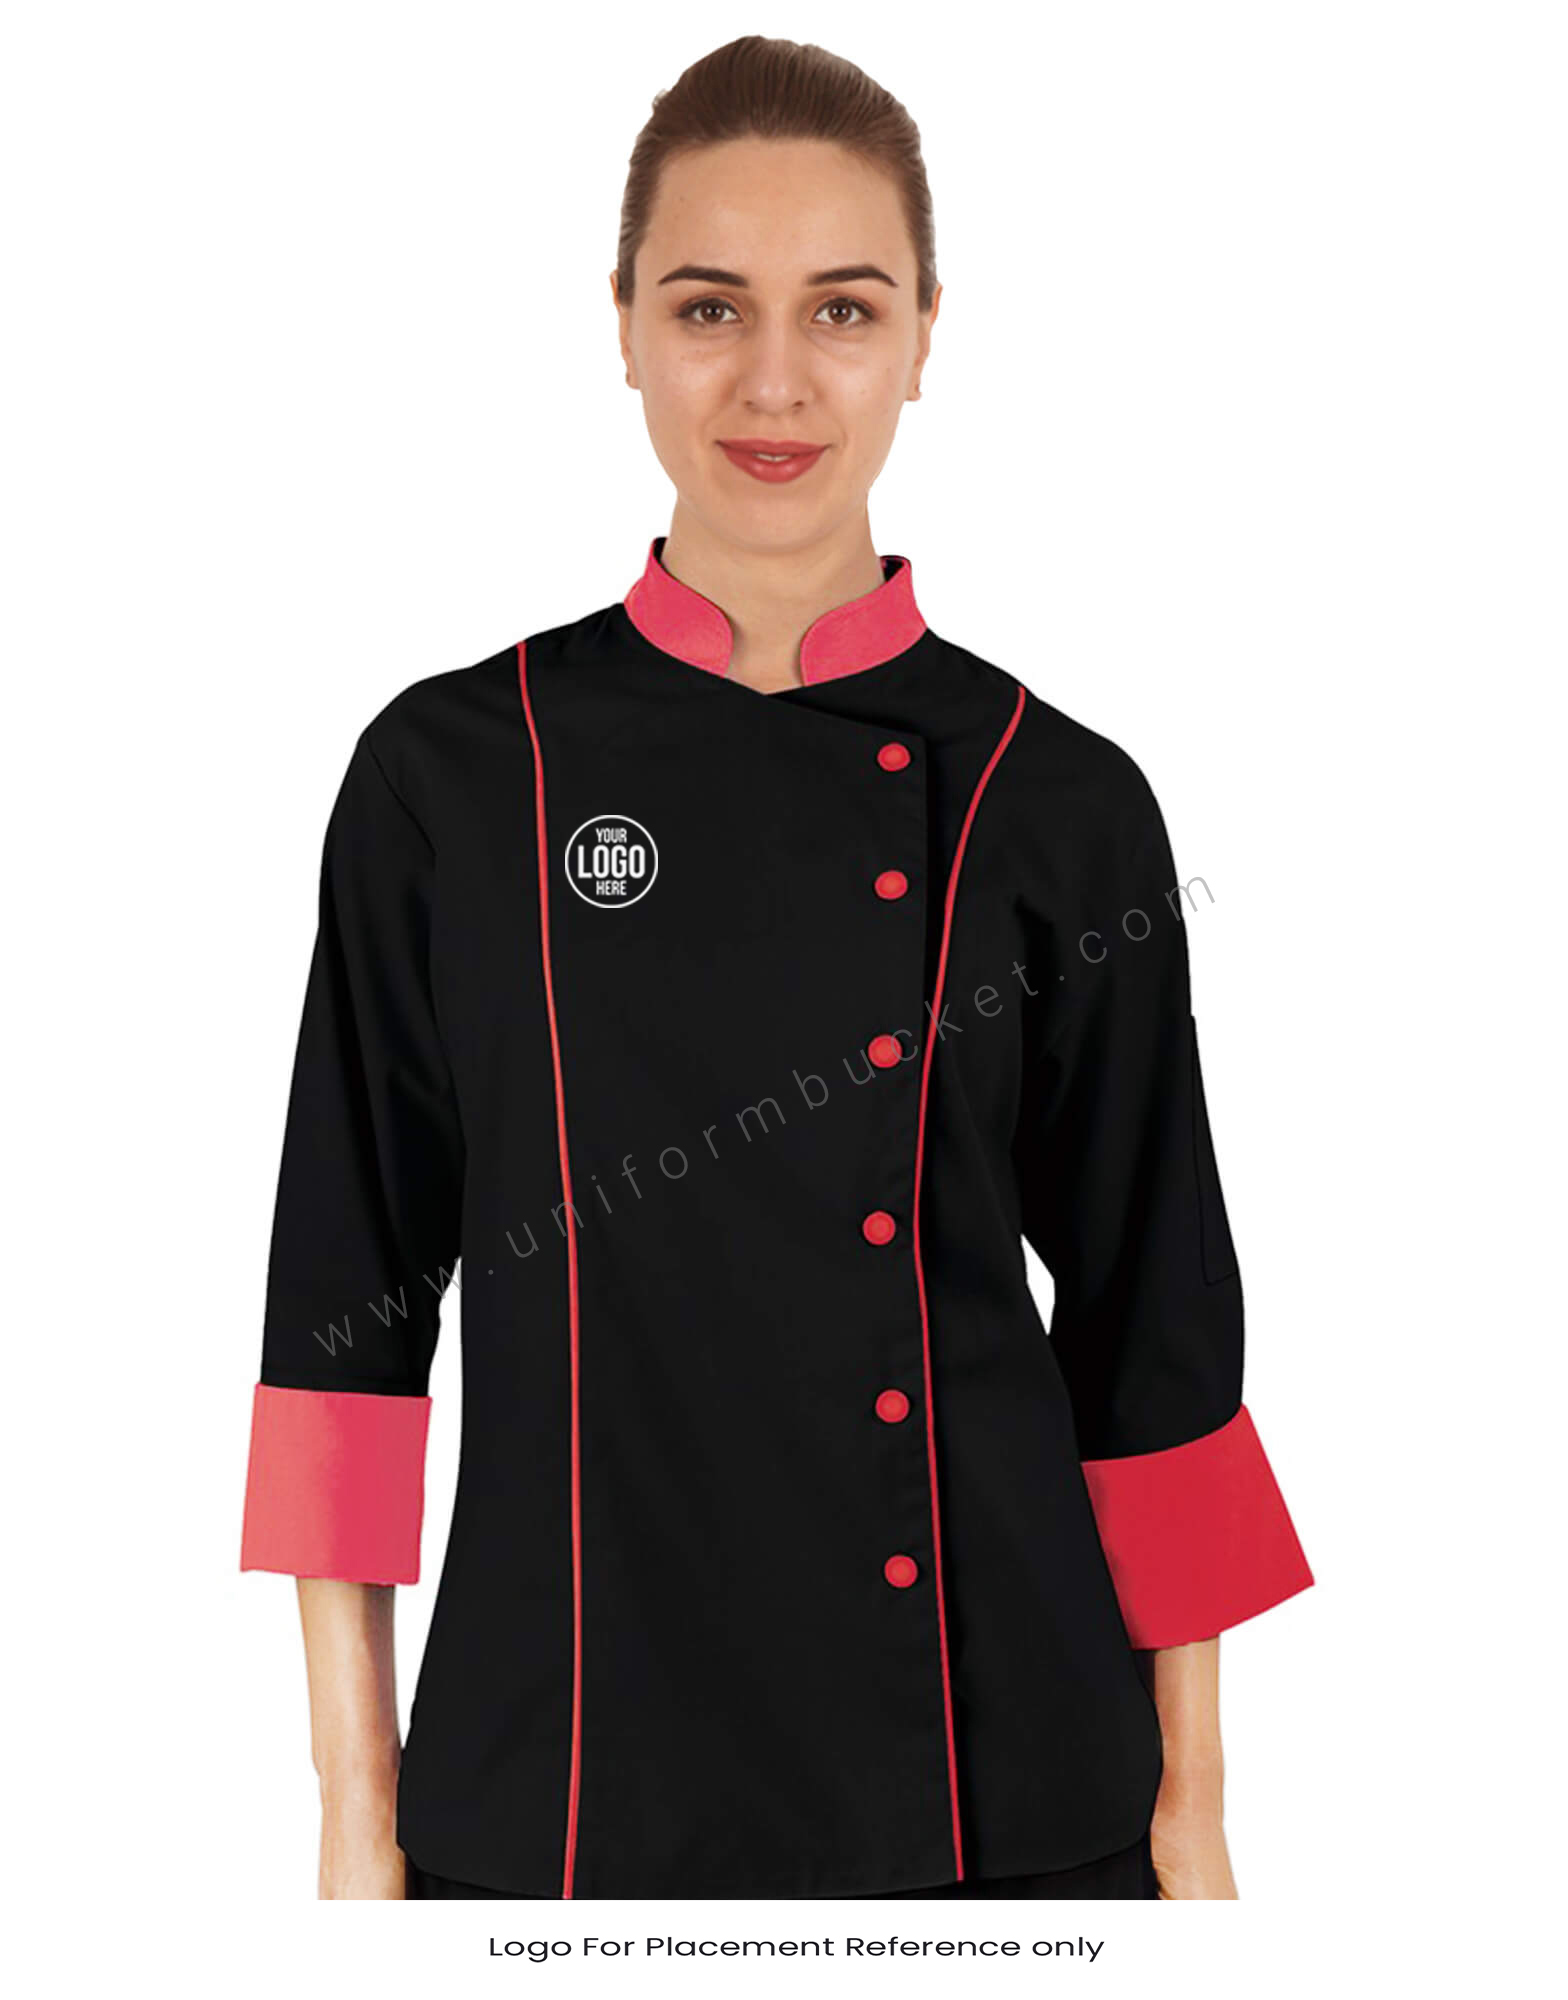 Black Chef Coat With Cherry Red Trim For Women